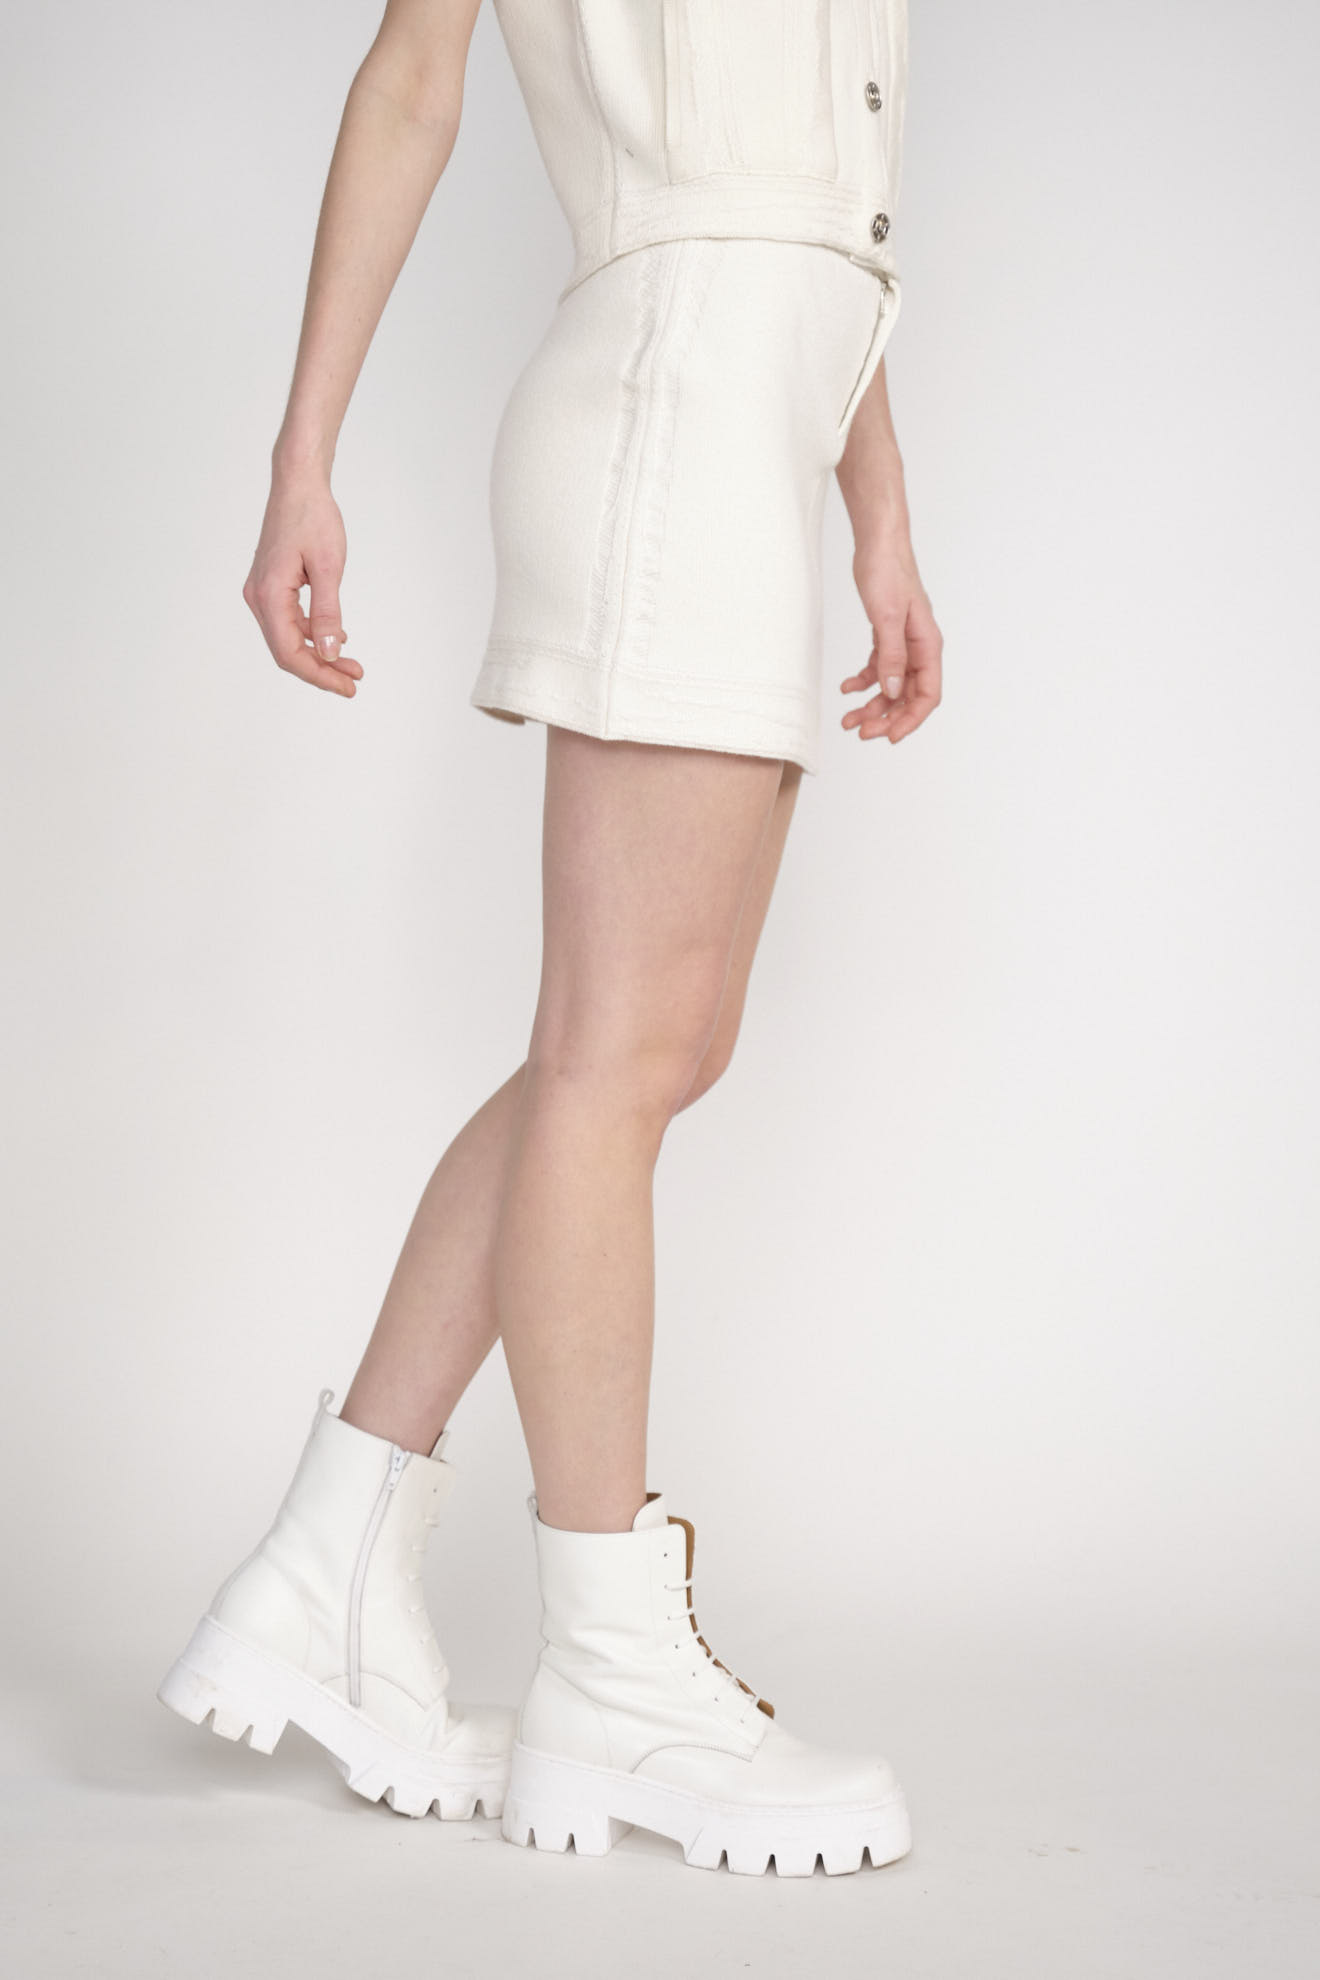 Barrie Denim Cashmere and Cotton SKirt - Miniskirt made out of Cashmere white S